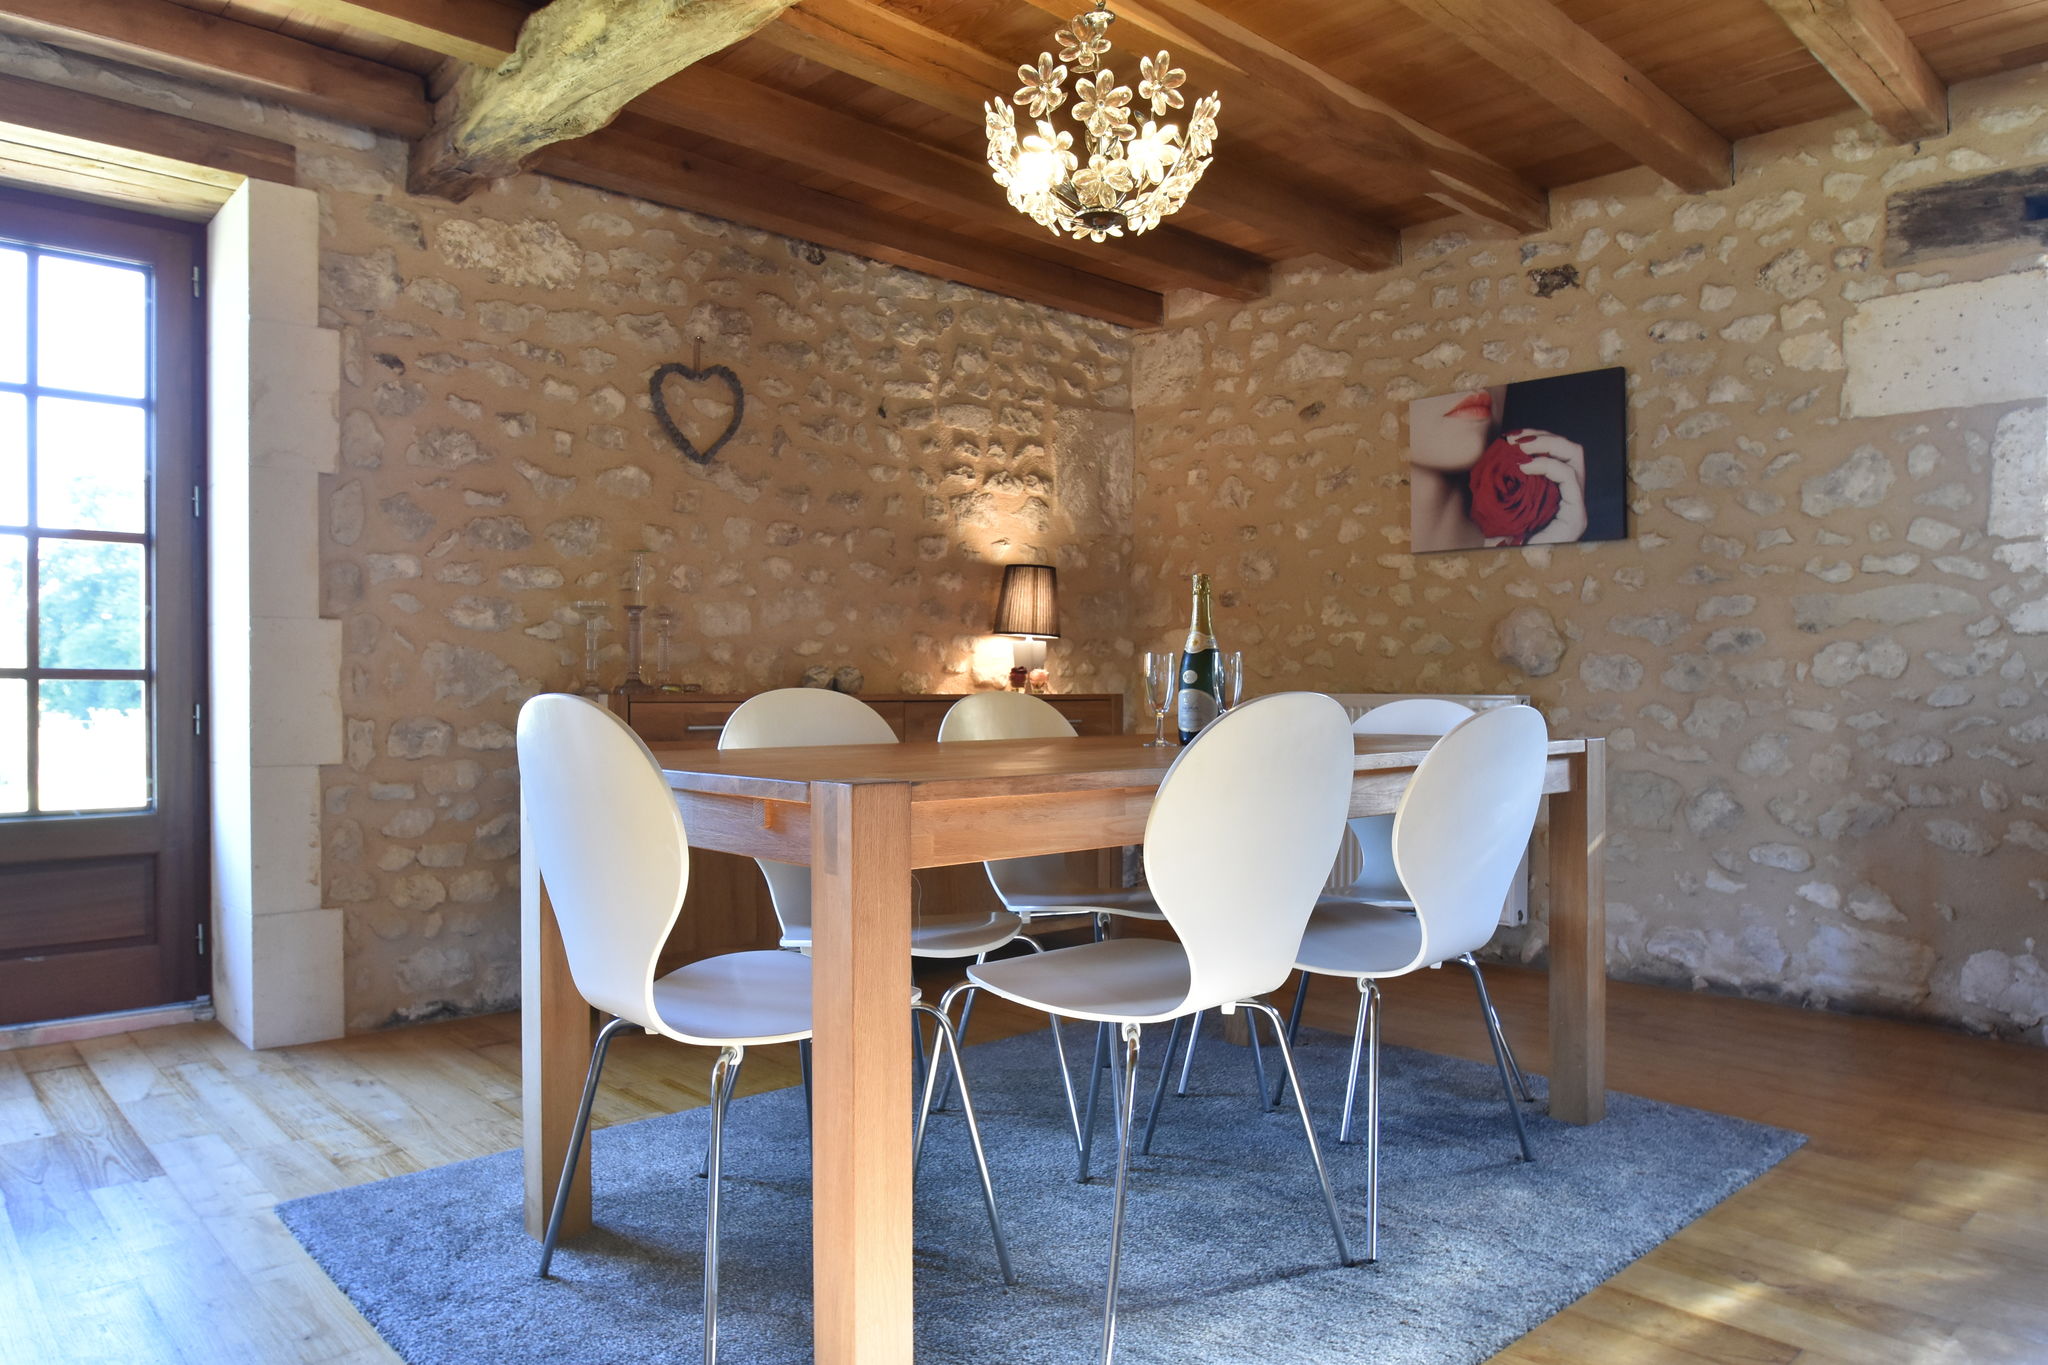 Beautiful holiday home with swimming pool, walking distance from the centre of Verteillac (1 km)